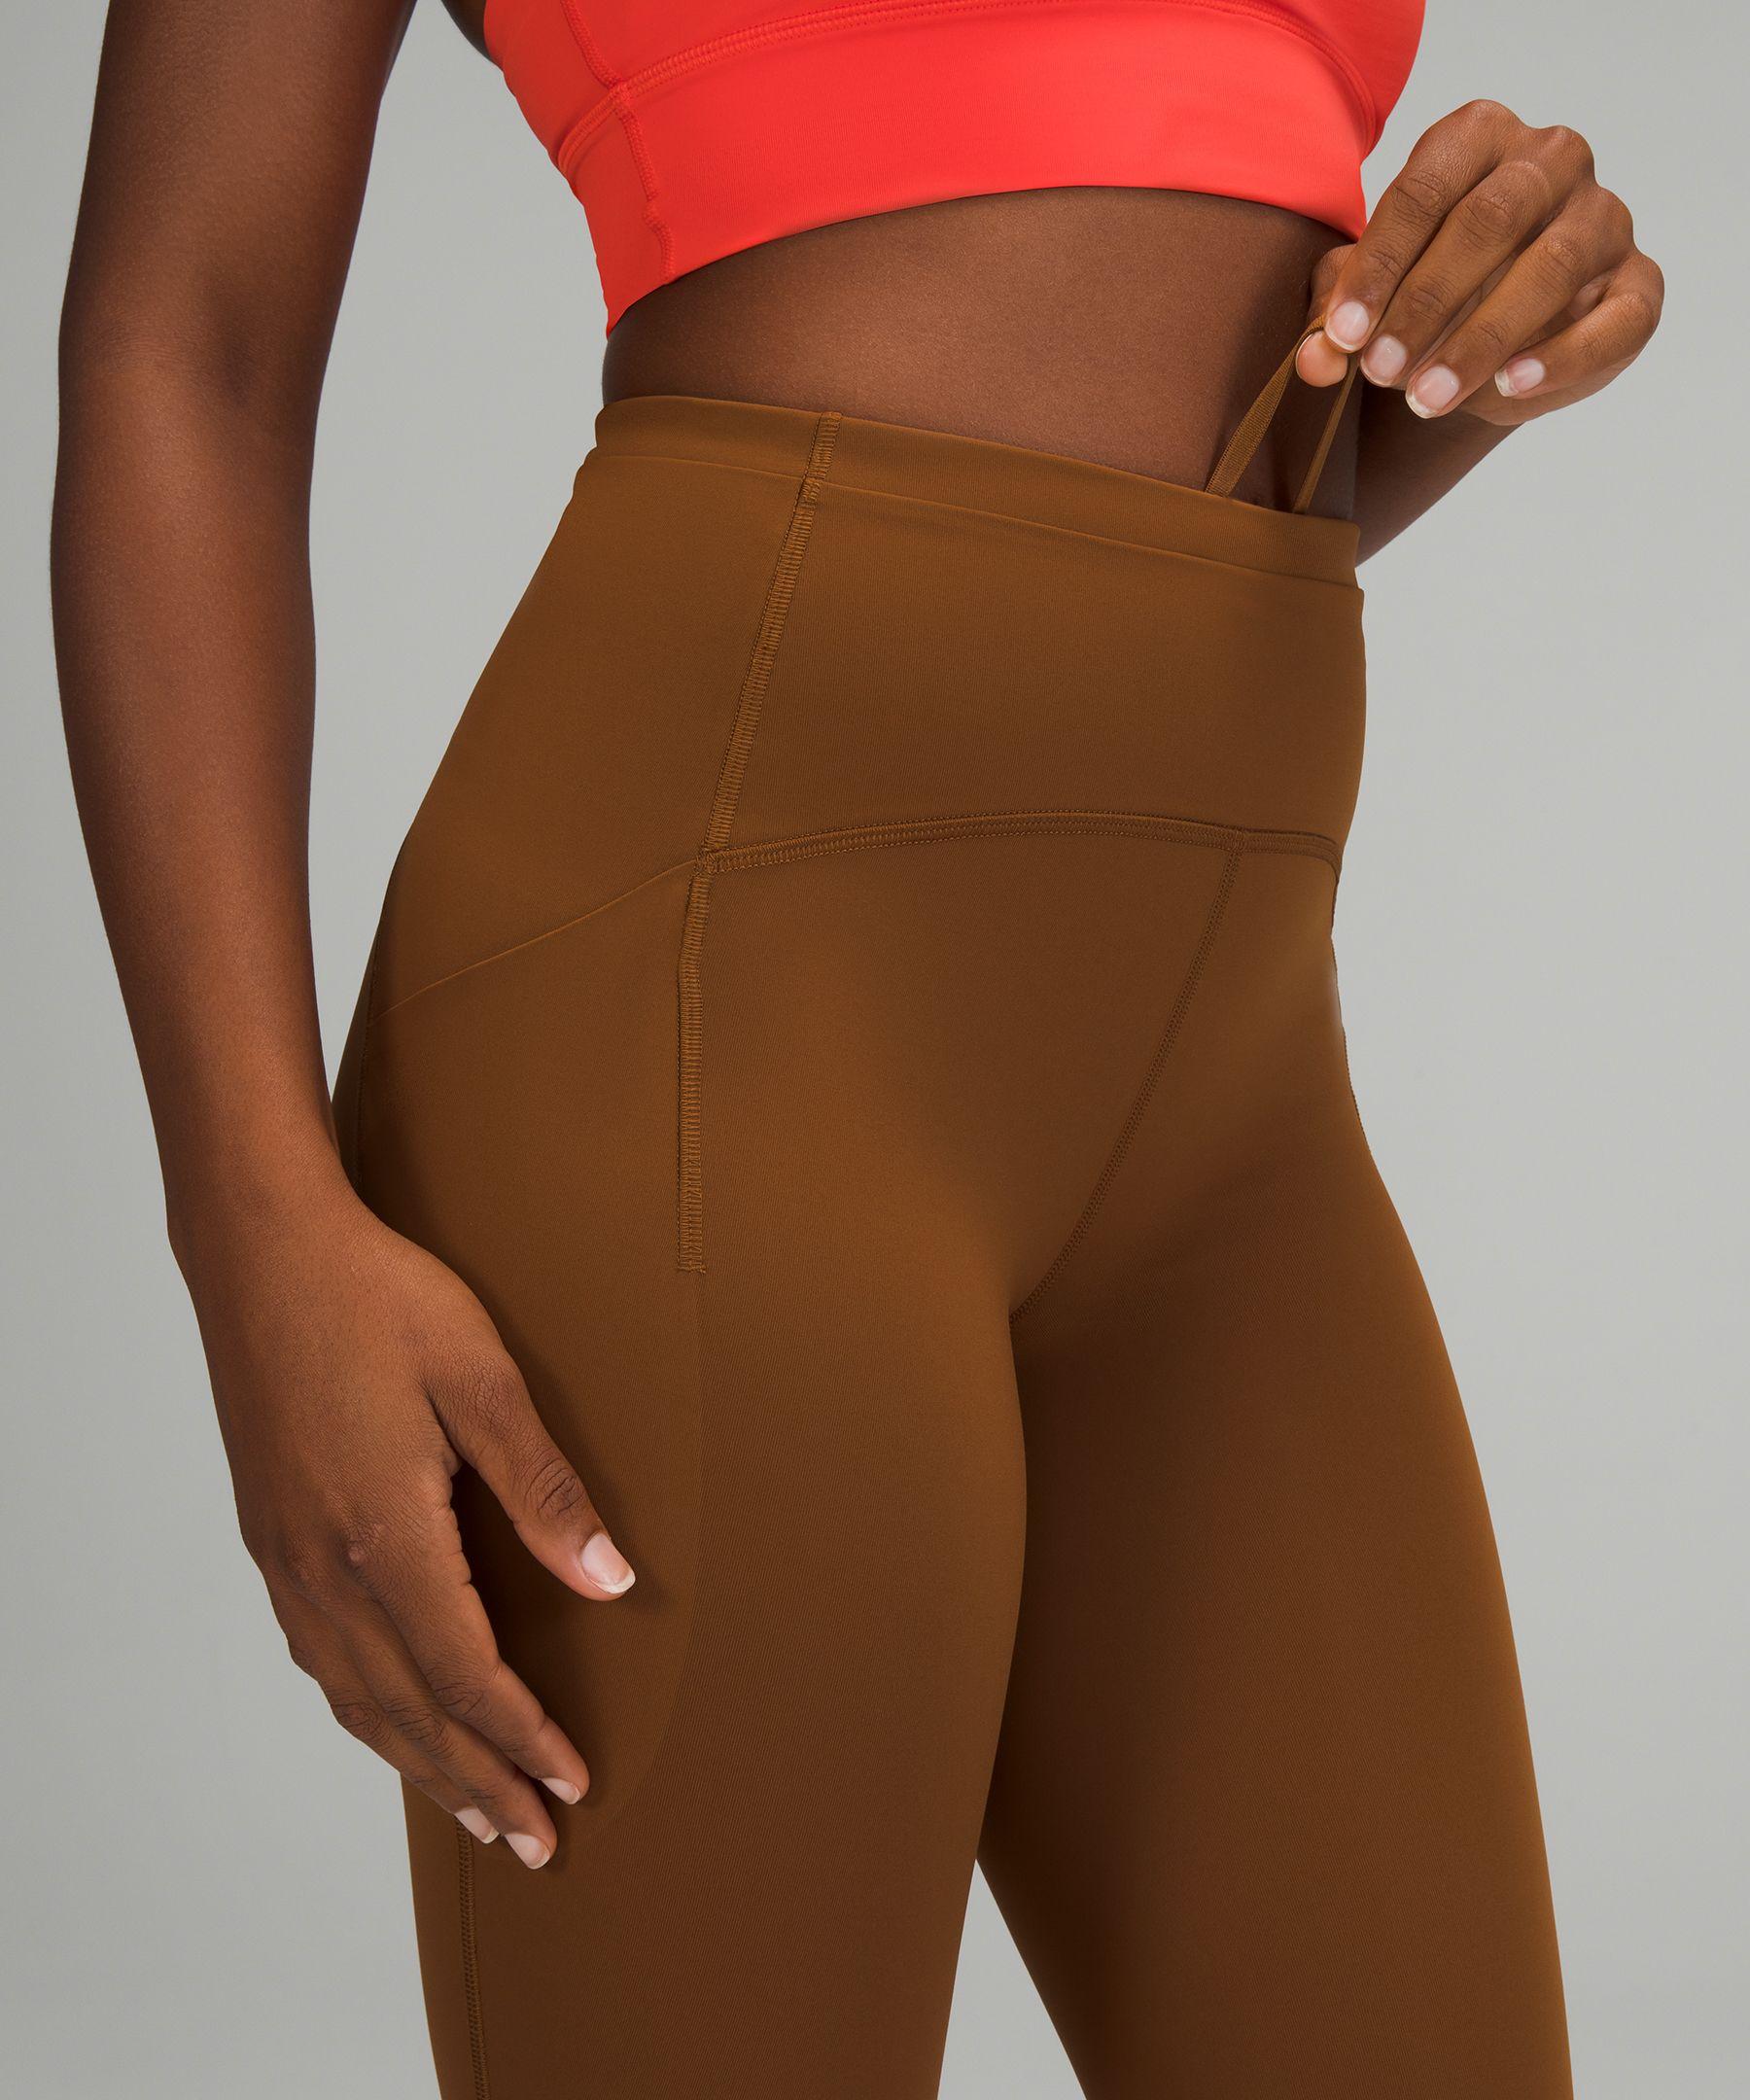 lululemon athletica Swift Speed High-rise Tights 28 in Brown